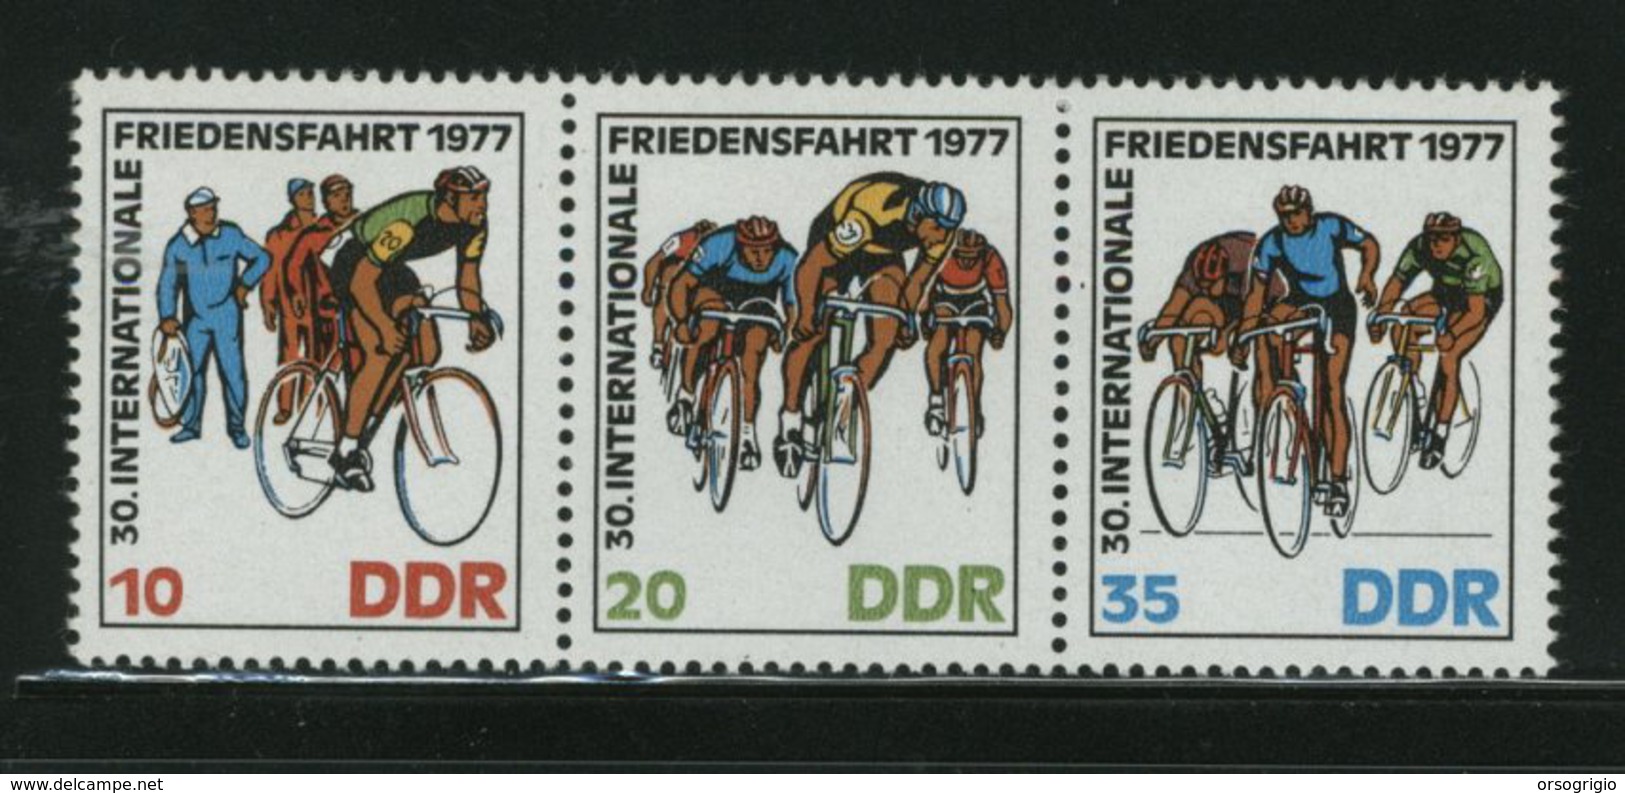 GERMANY DDR - VELO - CYCLE - BICICLETTA PORTAPACCHI - Wielrennen